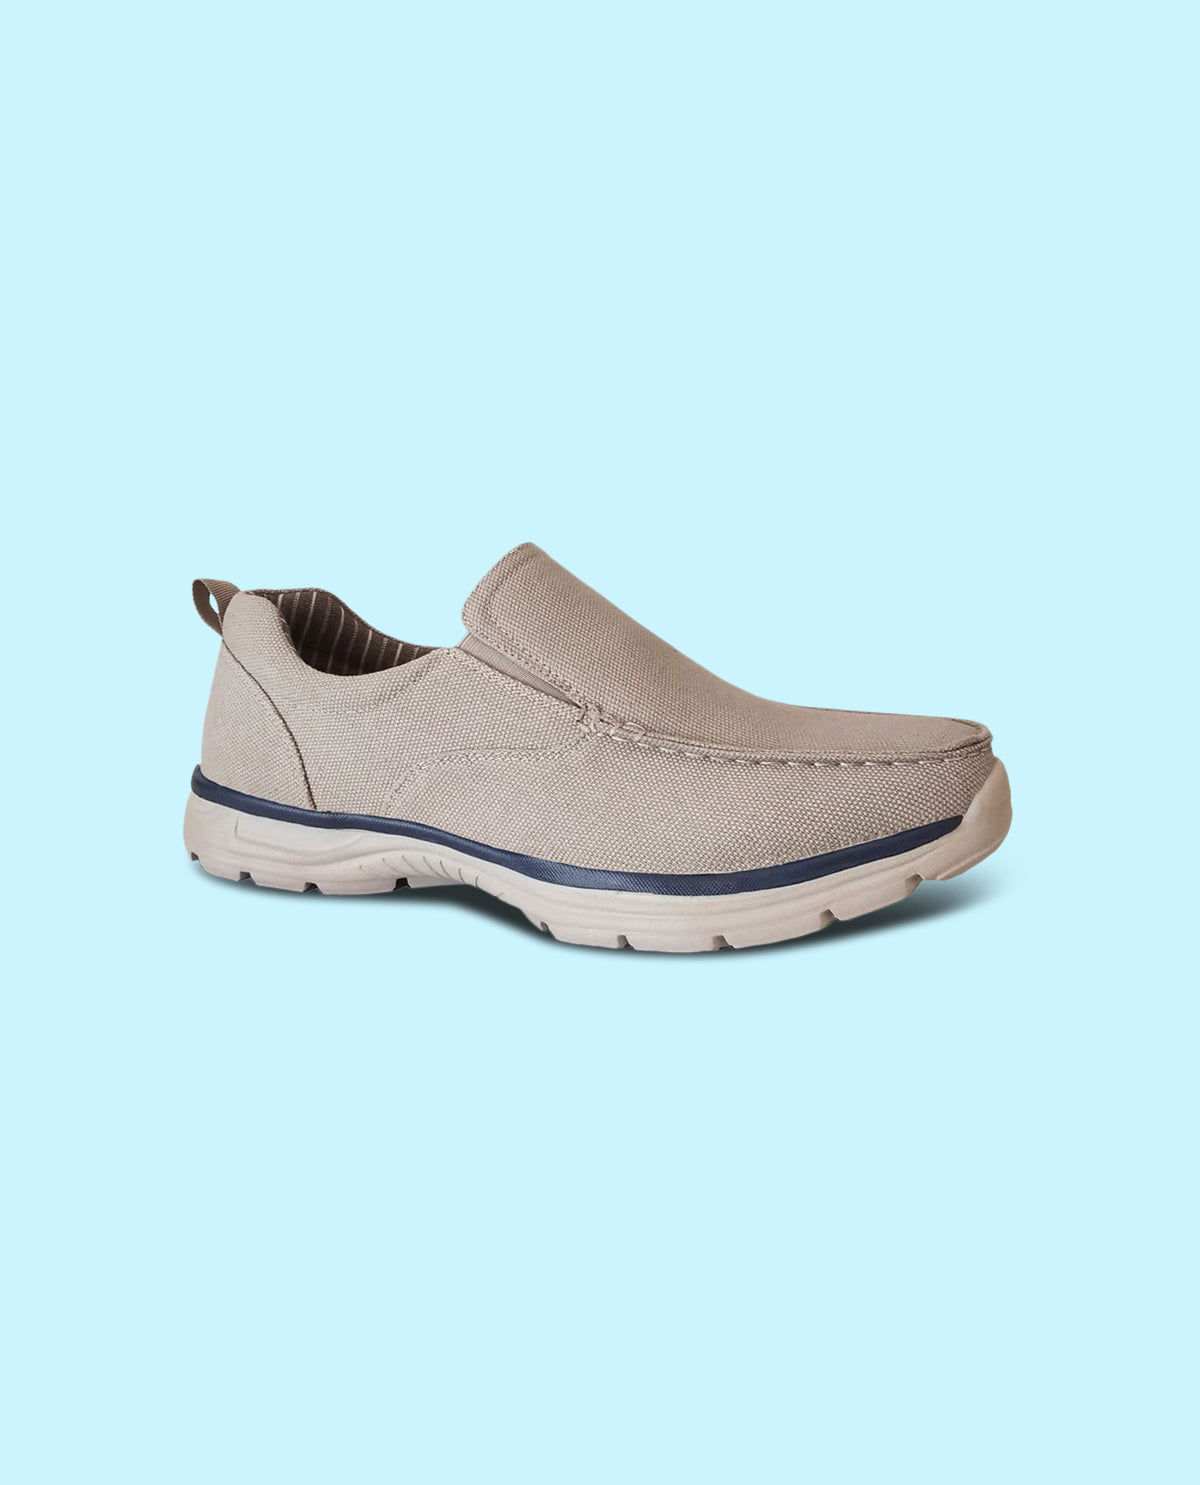 Tansmith Men's Canvas Slip-On Casual Shoe